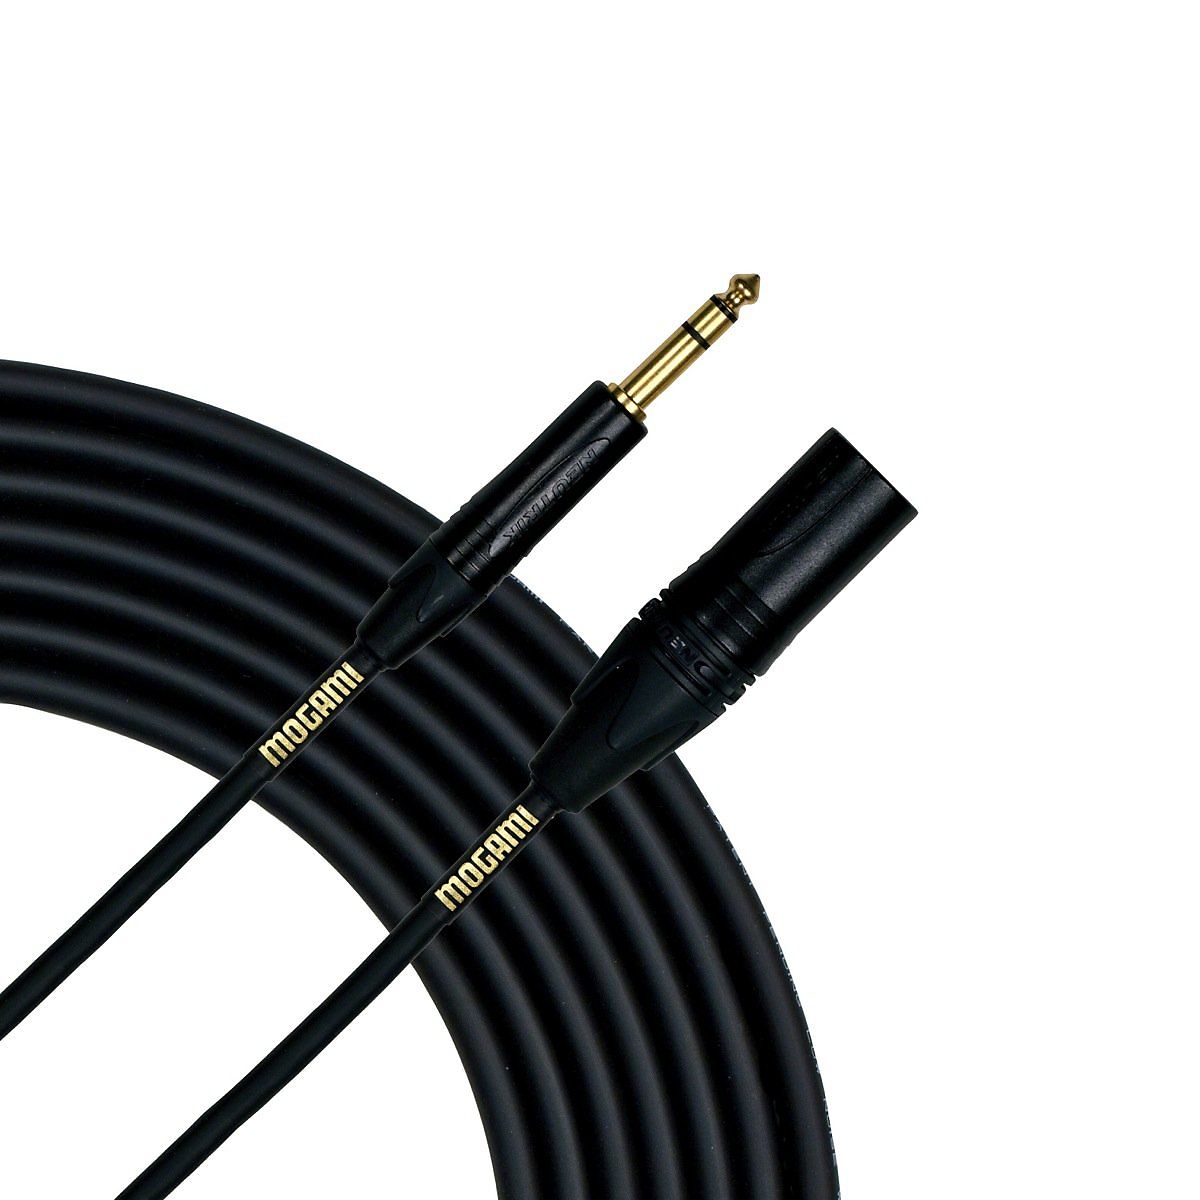 Mogami Gold 1/4 Inch TRS to XLR Male Cable, TRSXLRM-06, 6 Foot